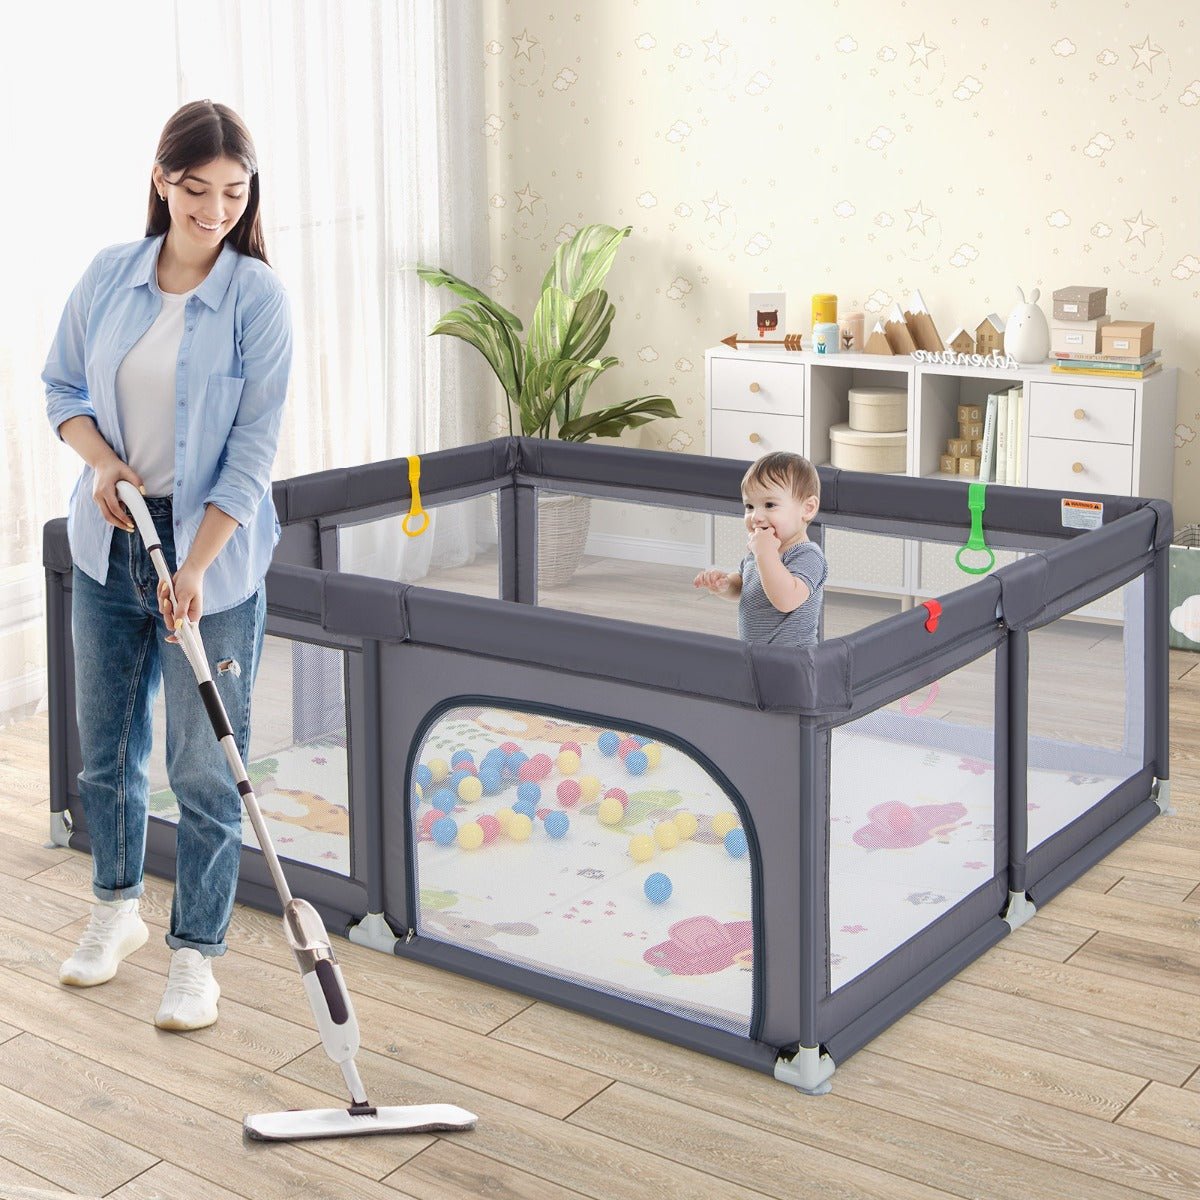 Easy-Setup Playpen with Comfort Mat for Babies